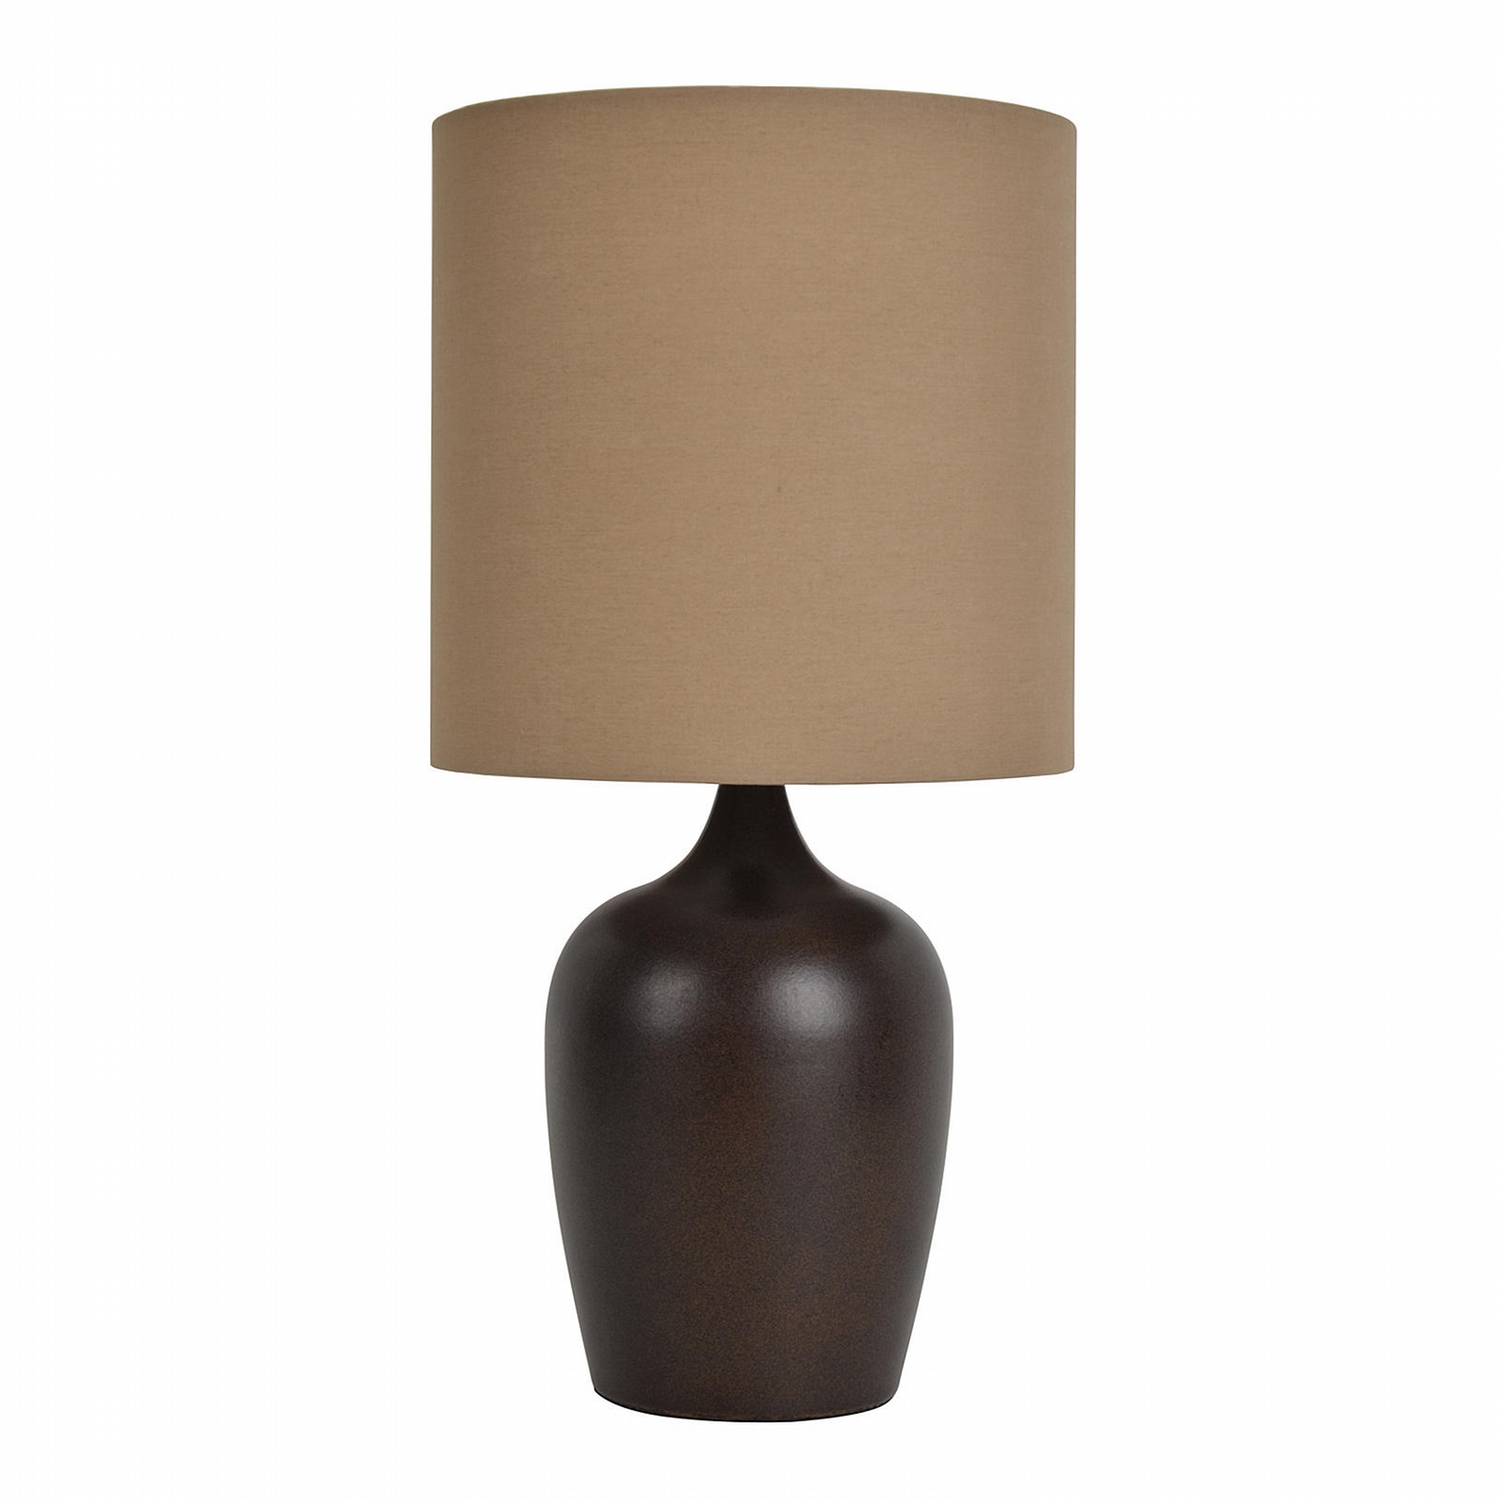 essential home bronze accent table lamp your way get cement outdoor coffee acrylic side with shelf leg brackets modern narrow country lamps small black bedside ashley furniture